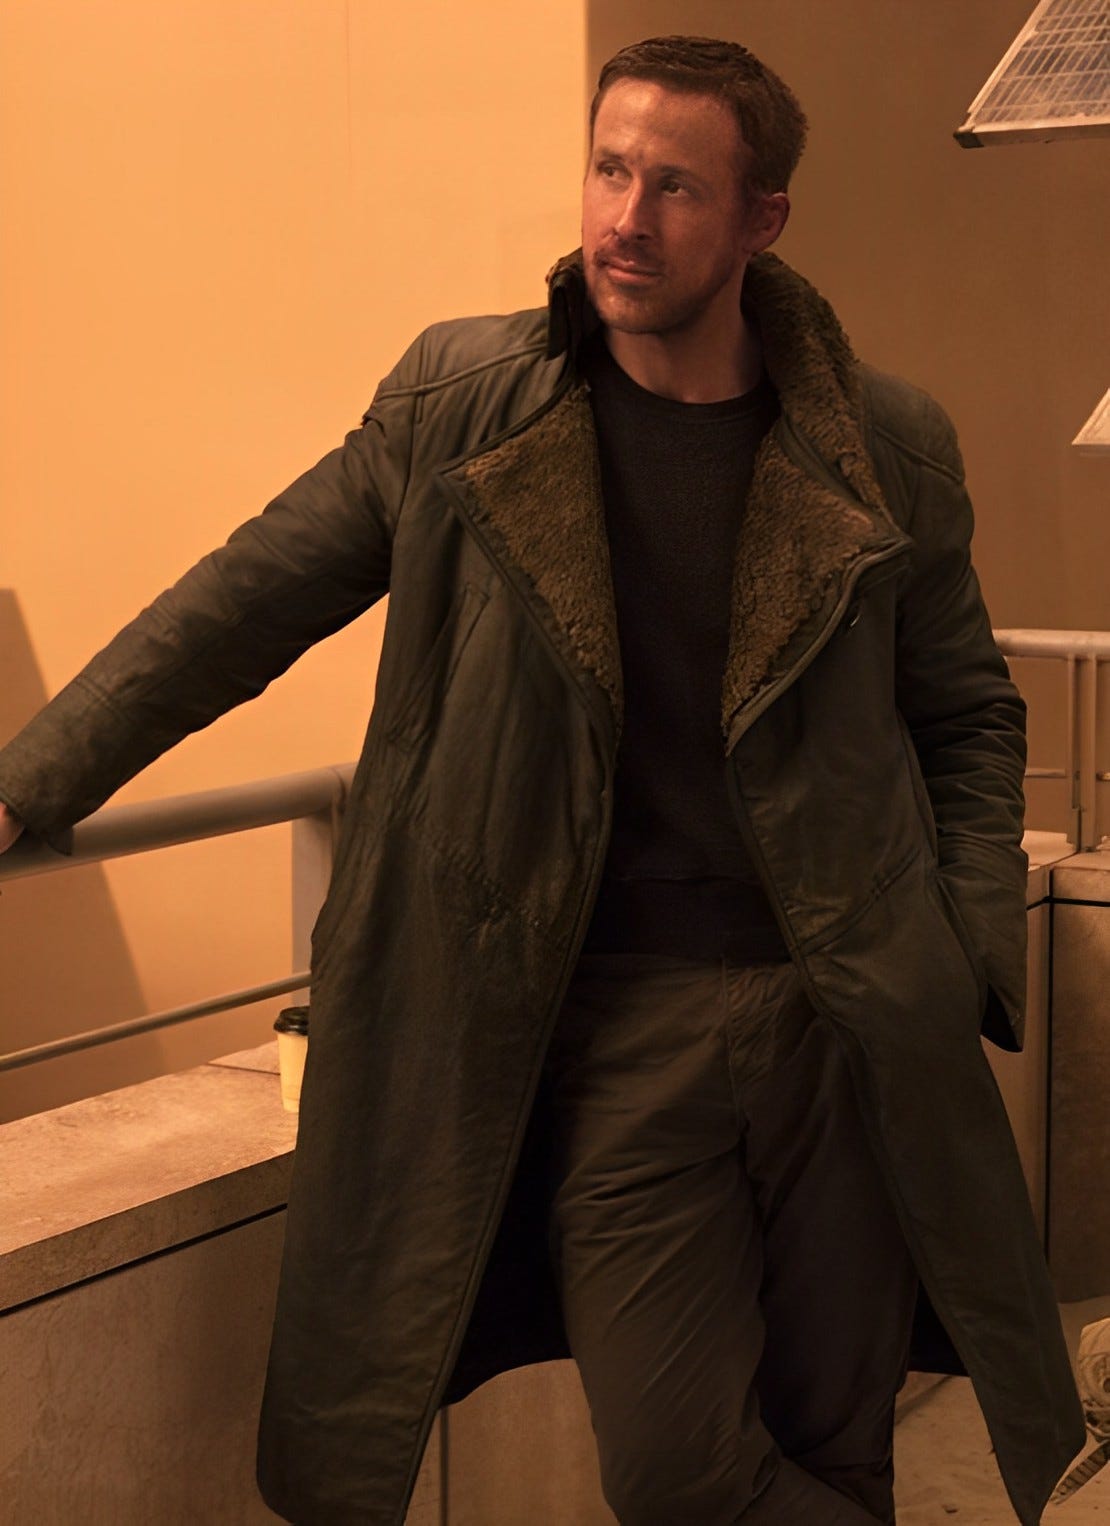 The Officer Blade Runner 2049 Officer K Played By Ryan Gosling Is By The Original Medium 